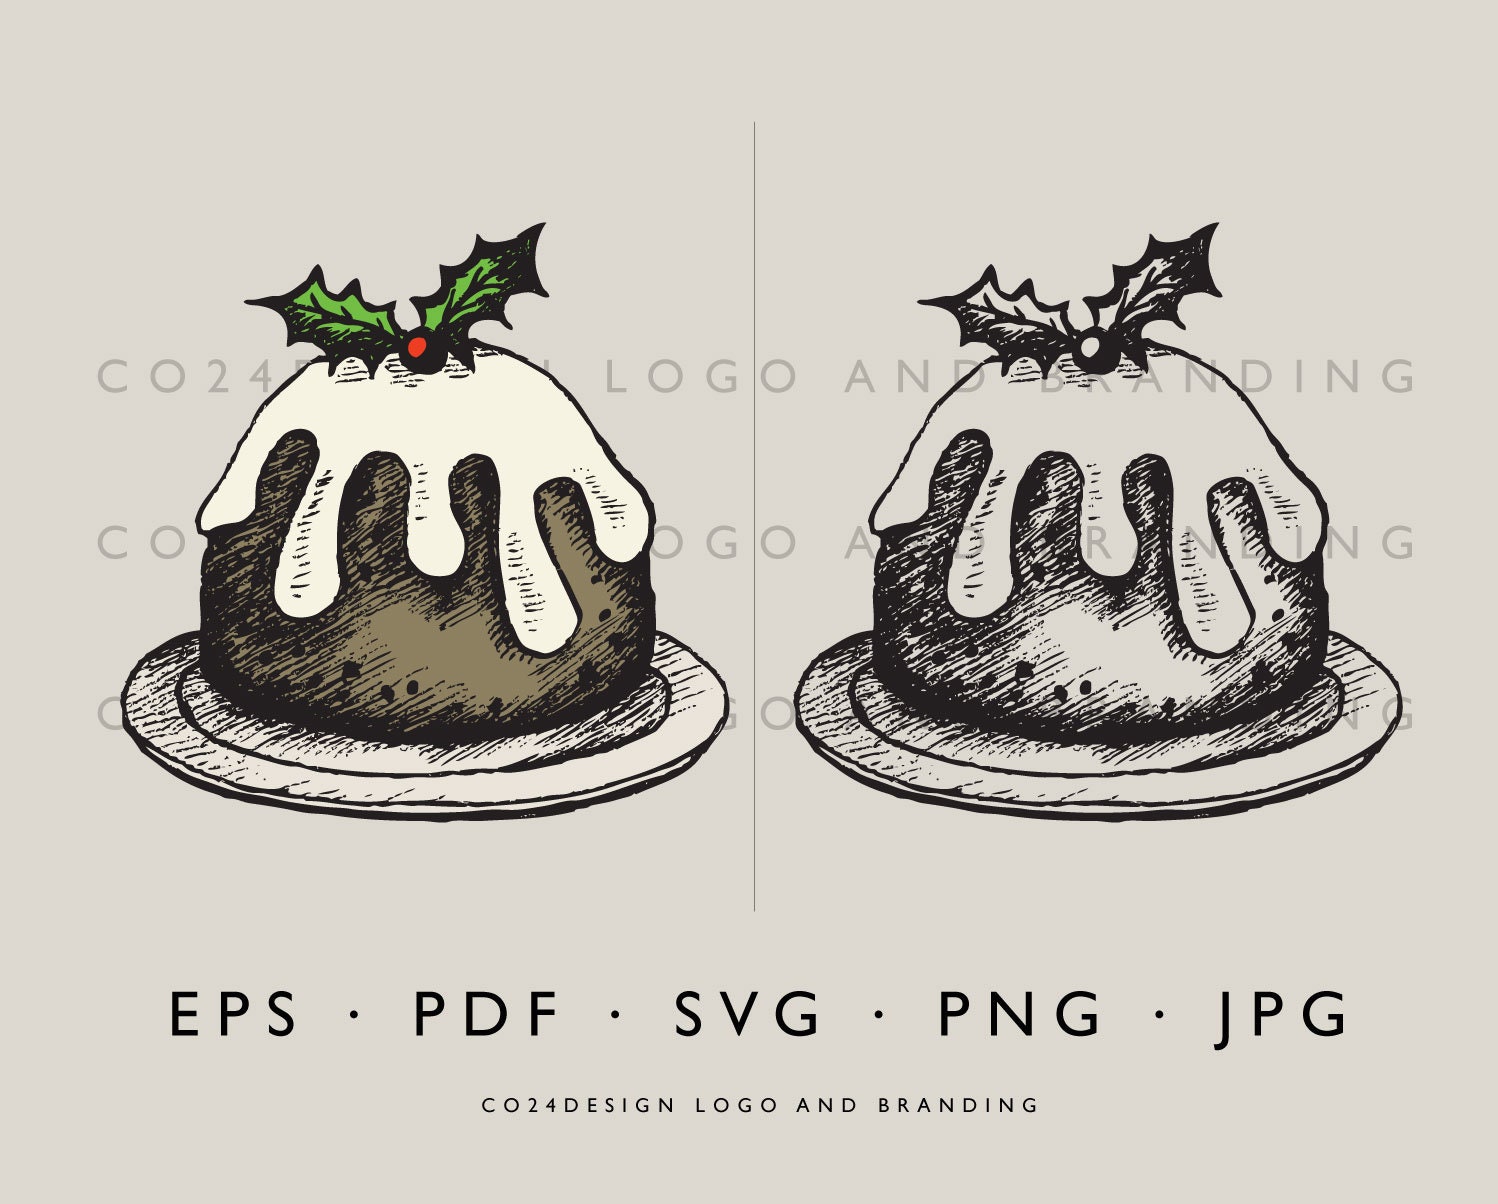 Vintage Christmas Greenery Clip Art By Patterns for Dessert